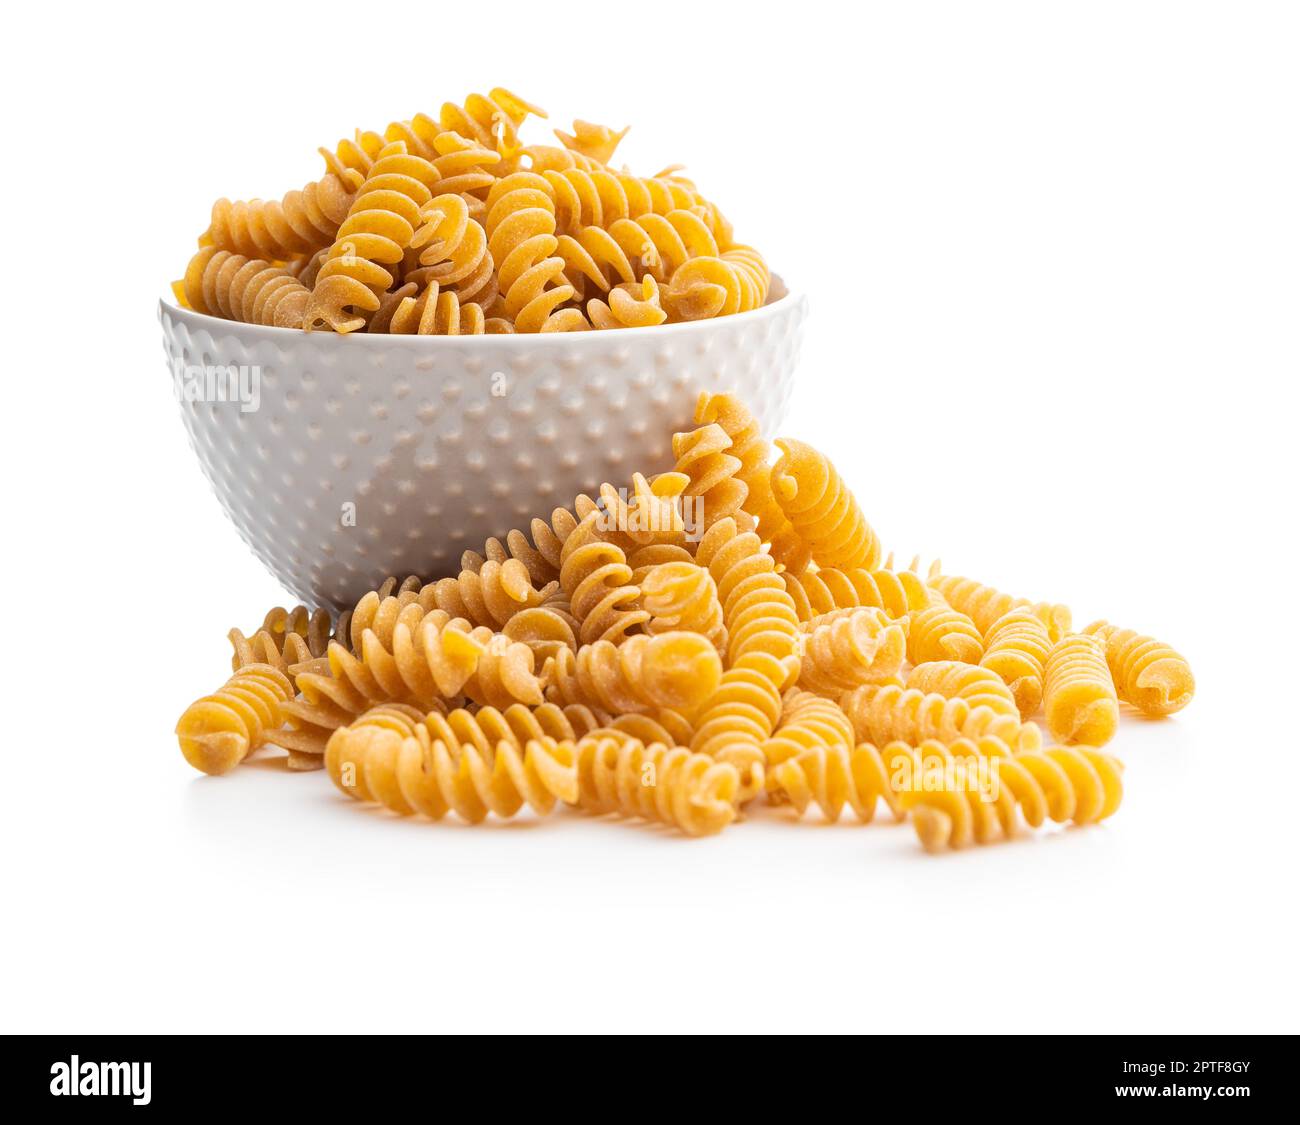 Uncooked whole grain pasta isolated on white background. Raw pasta in the bowl. Stock Photo